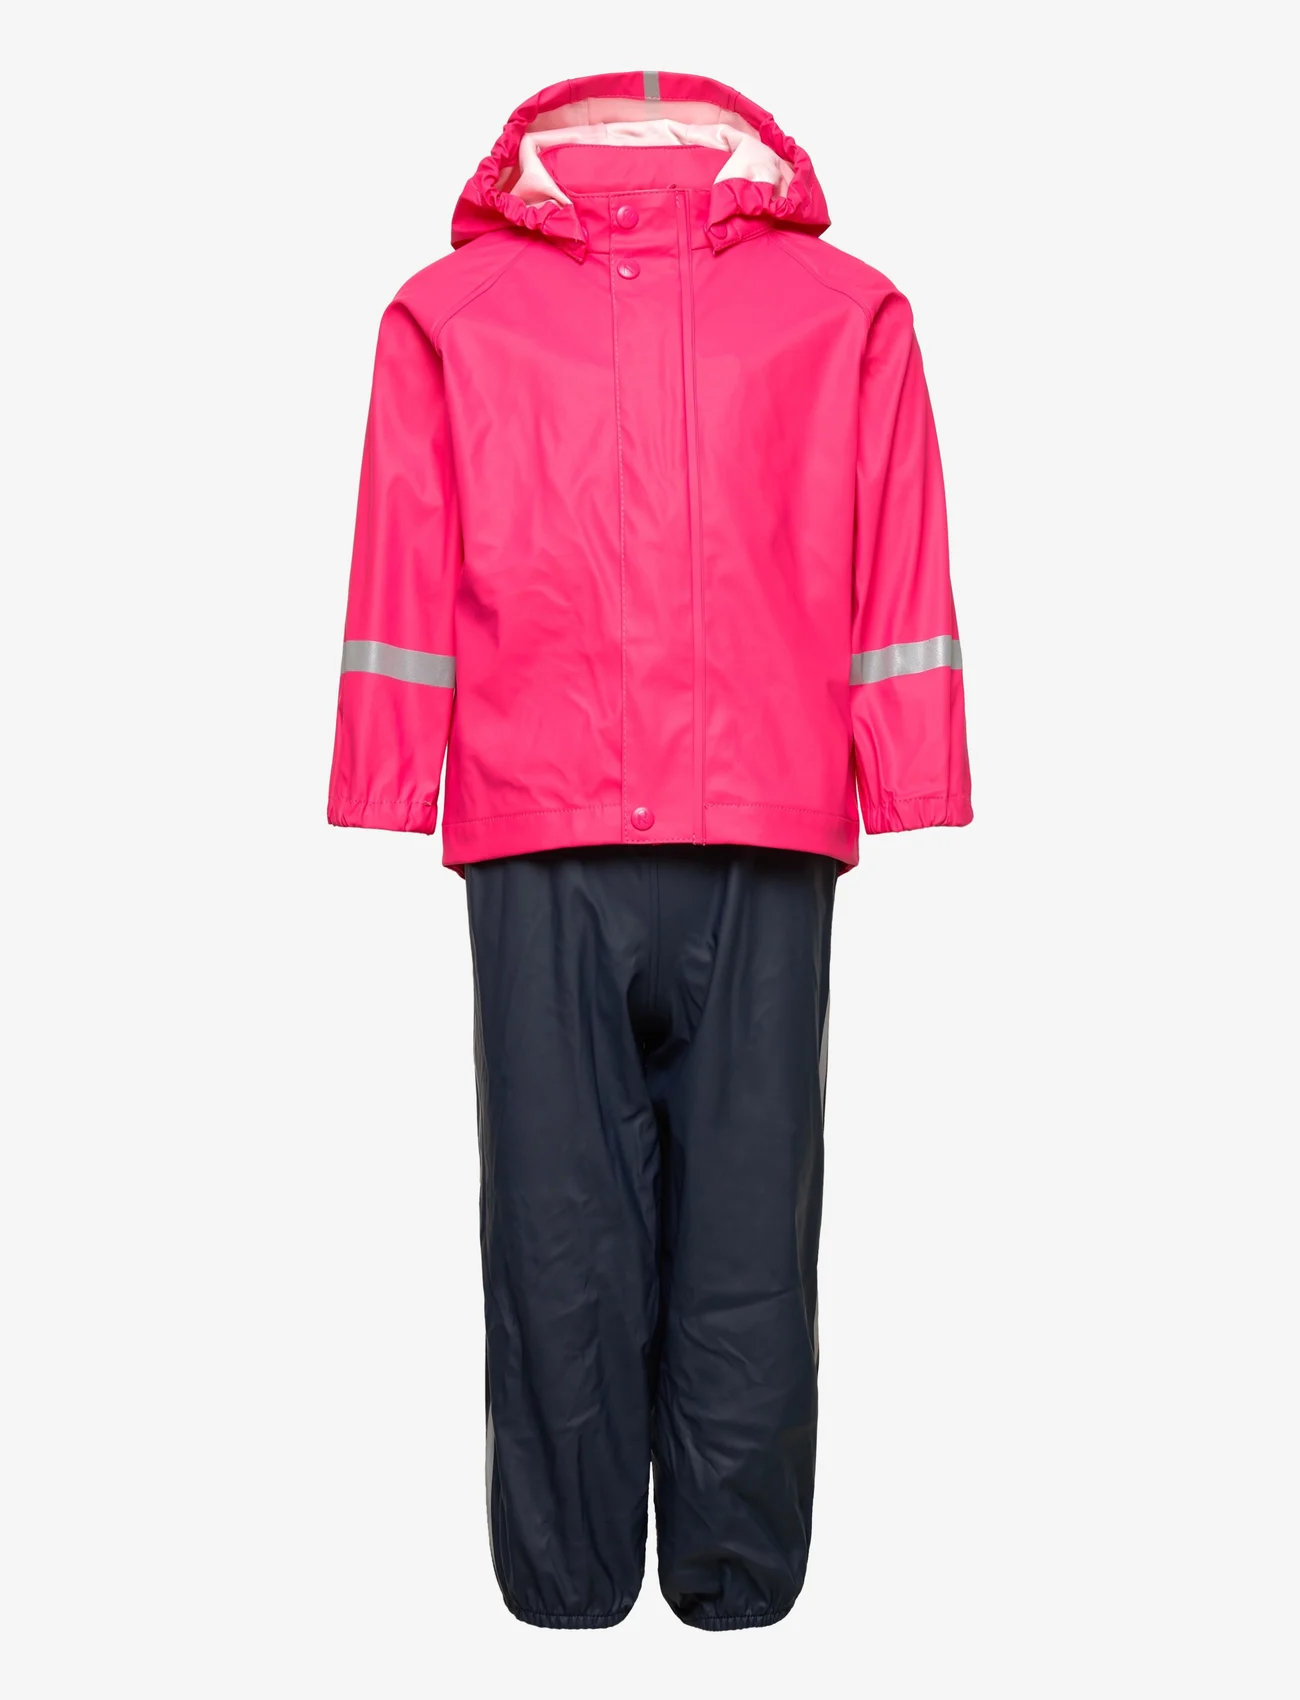 Reima - Rain outfit, Tihku - regensets - candy pink - 0